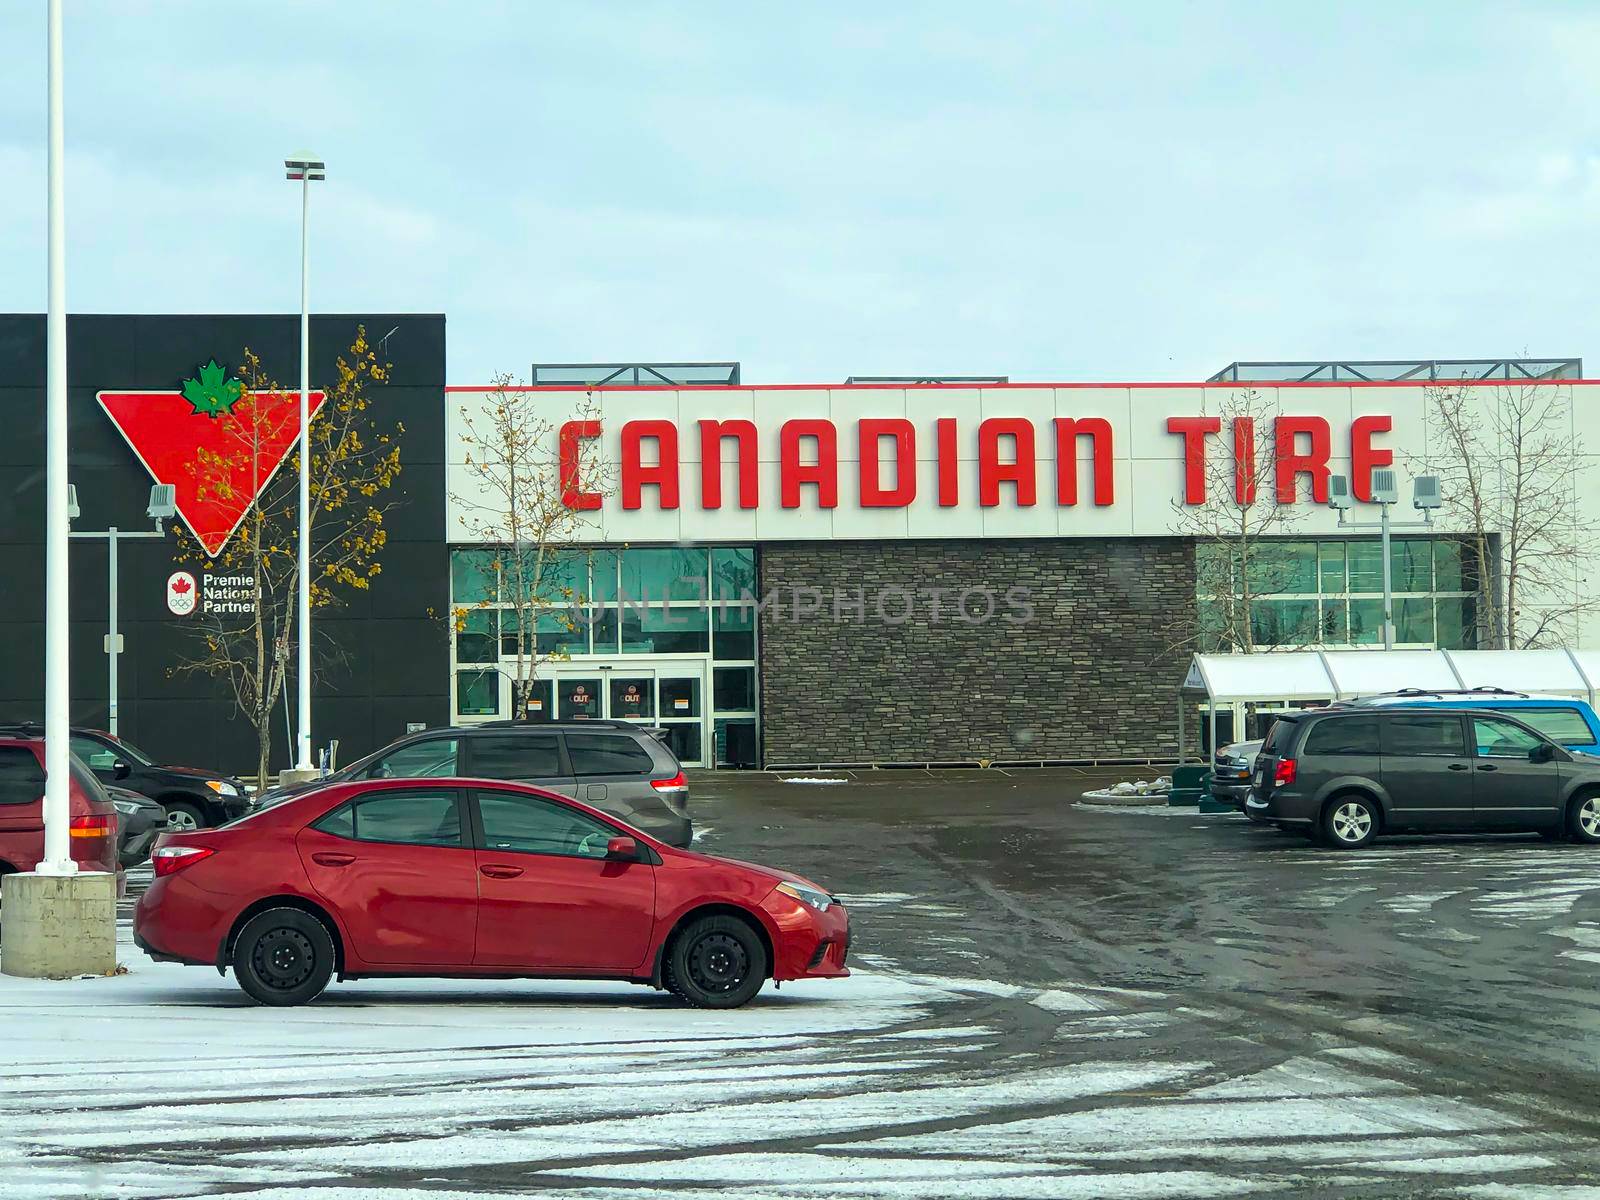 Calgary Alberta, Canada. Oct 17, 2020. Canadian Tire store during winter time. by oasisamuel